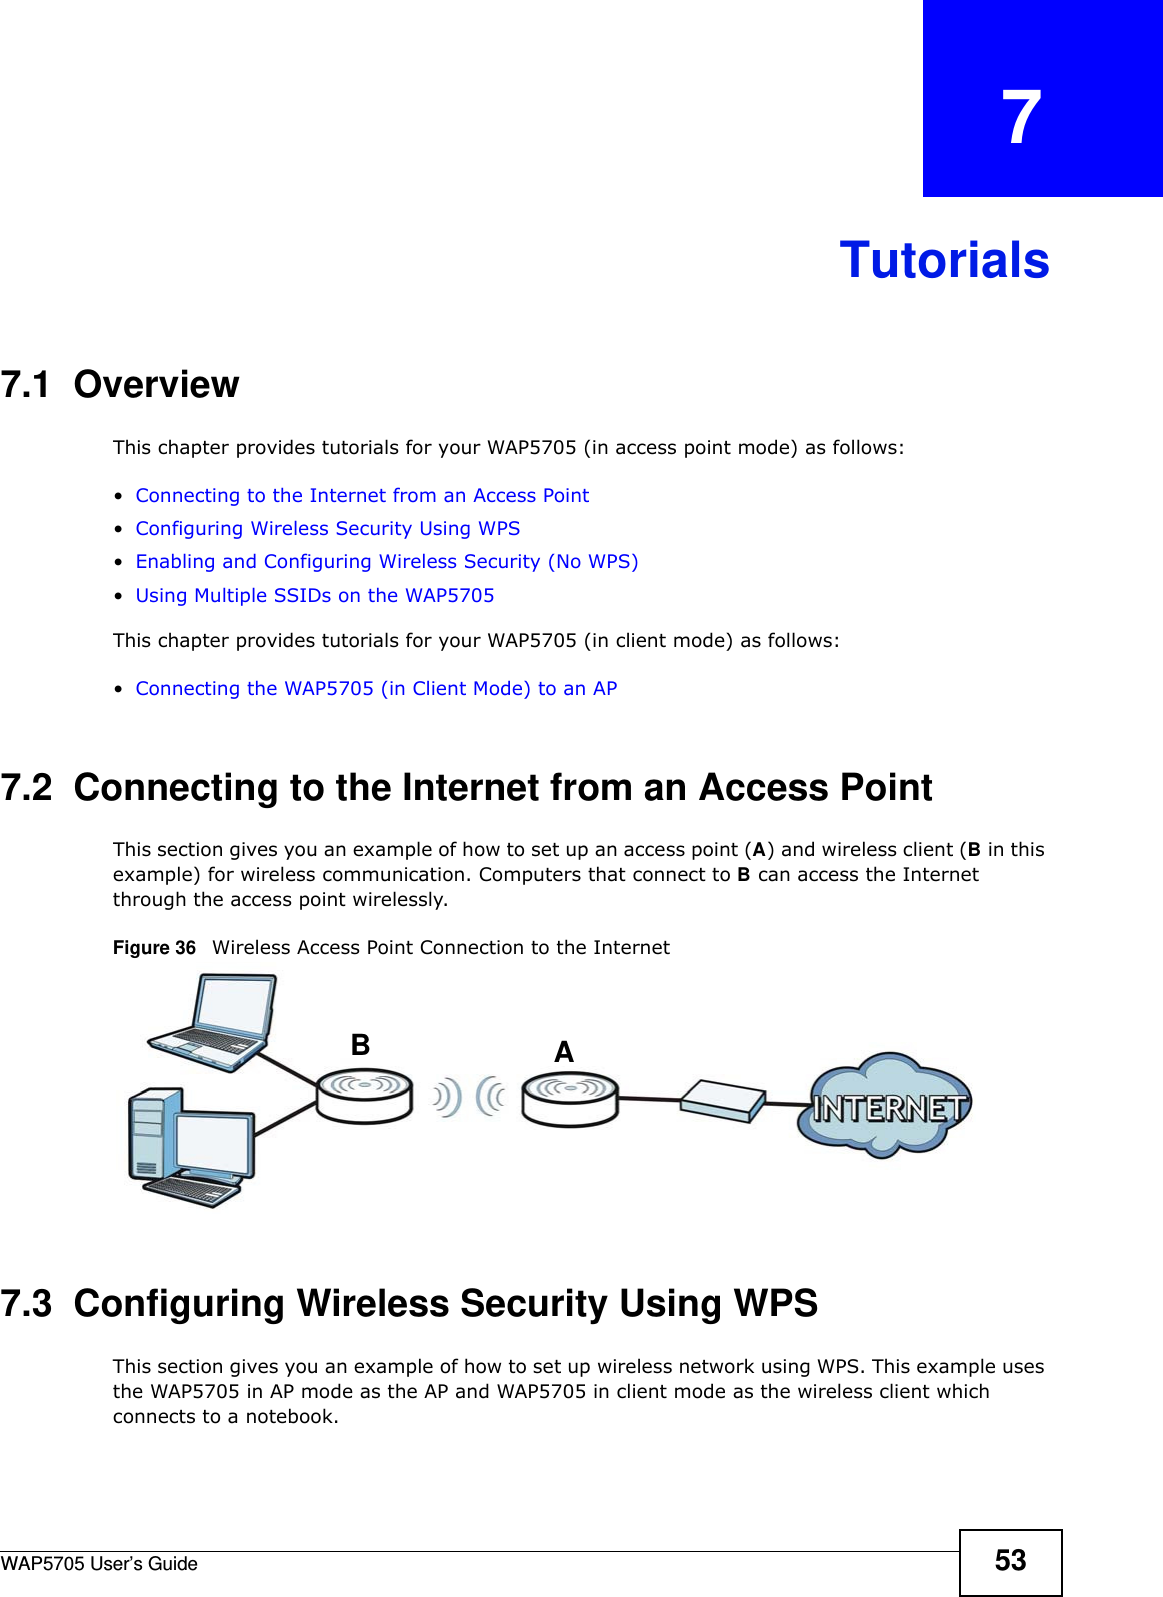 WAP5705 User’s Guide 53CHAPTER   7Tutorials7.1  OverviewThis chapter provides tutorials for your WAP5705 (in access point mode) as follows:•Connecting to the Internet from an Access Point•Configuring Wireless Security Using WPS•Enabling and Configuring Wireless Security (No WPS)•Using Multiple SSIDs on the WAP5705This chapter provides tutorials for your WAP5705 (in client mode) as follows:•Connecting the WAP5705 (in Client Mode) to an AP7.2  Connecting to the Internet from an Access PointThis section gives you an example of how to set up an access point (A) and wireless client (B in this example) for wireless communication. Computers that connect to B can access the Internet through the access point wirelessly.Figure 36   Wireless Access Point Connection to the Internet7.3  Configuring Wireless Security Using WPSThis section gives you an example of how to set up wireless network using WPS. This example uses the WAP5705 in AP mode as the AP and WAP5705 in client mode as the wireless client which connects to a notebook. AB